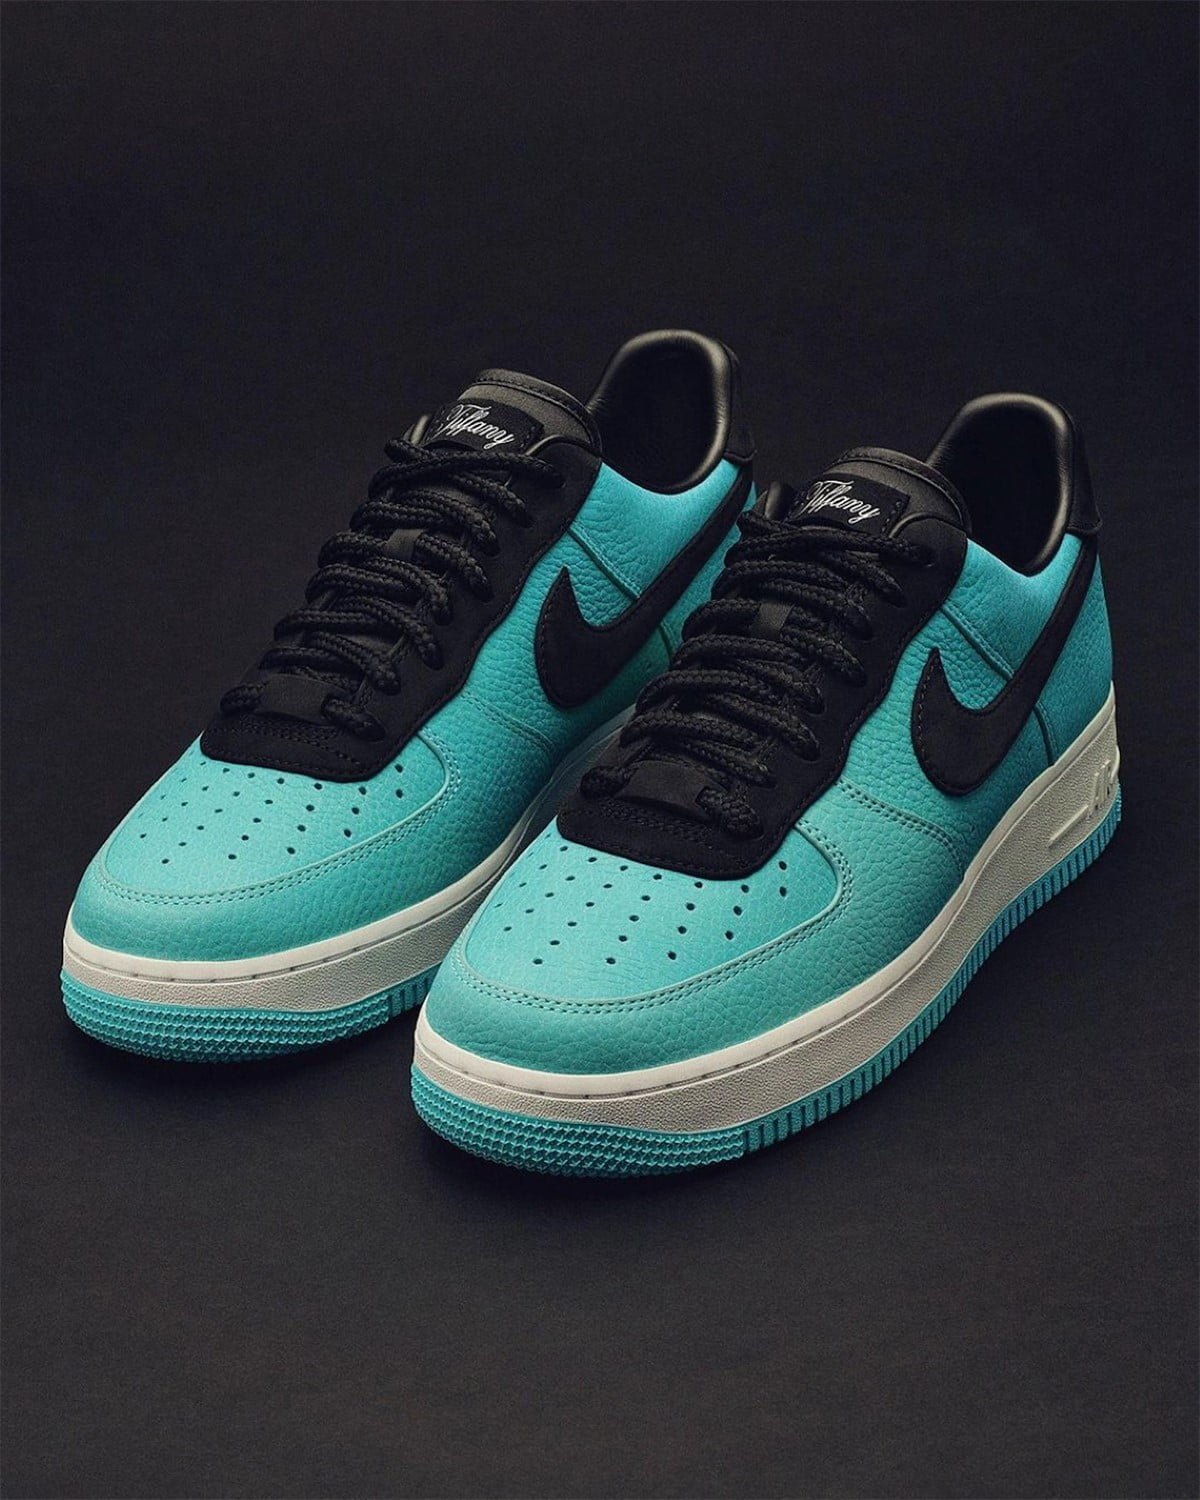 Tiffany & Co. x Nike Air Force 1 Low “1837” Friends & Family Version